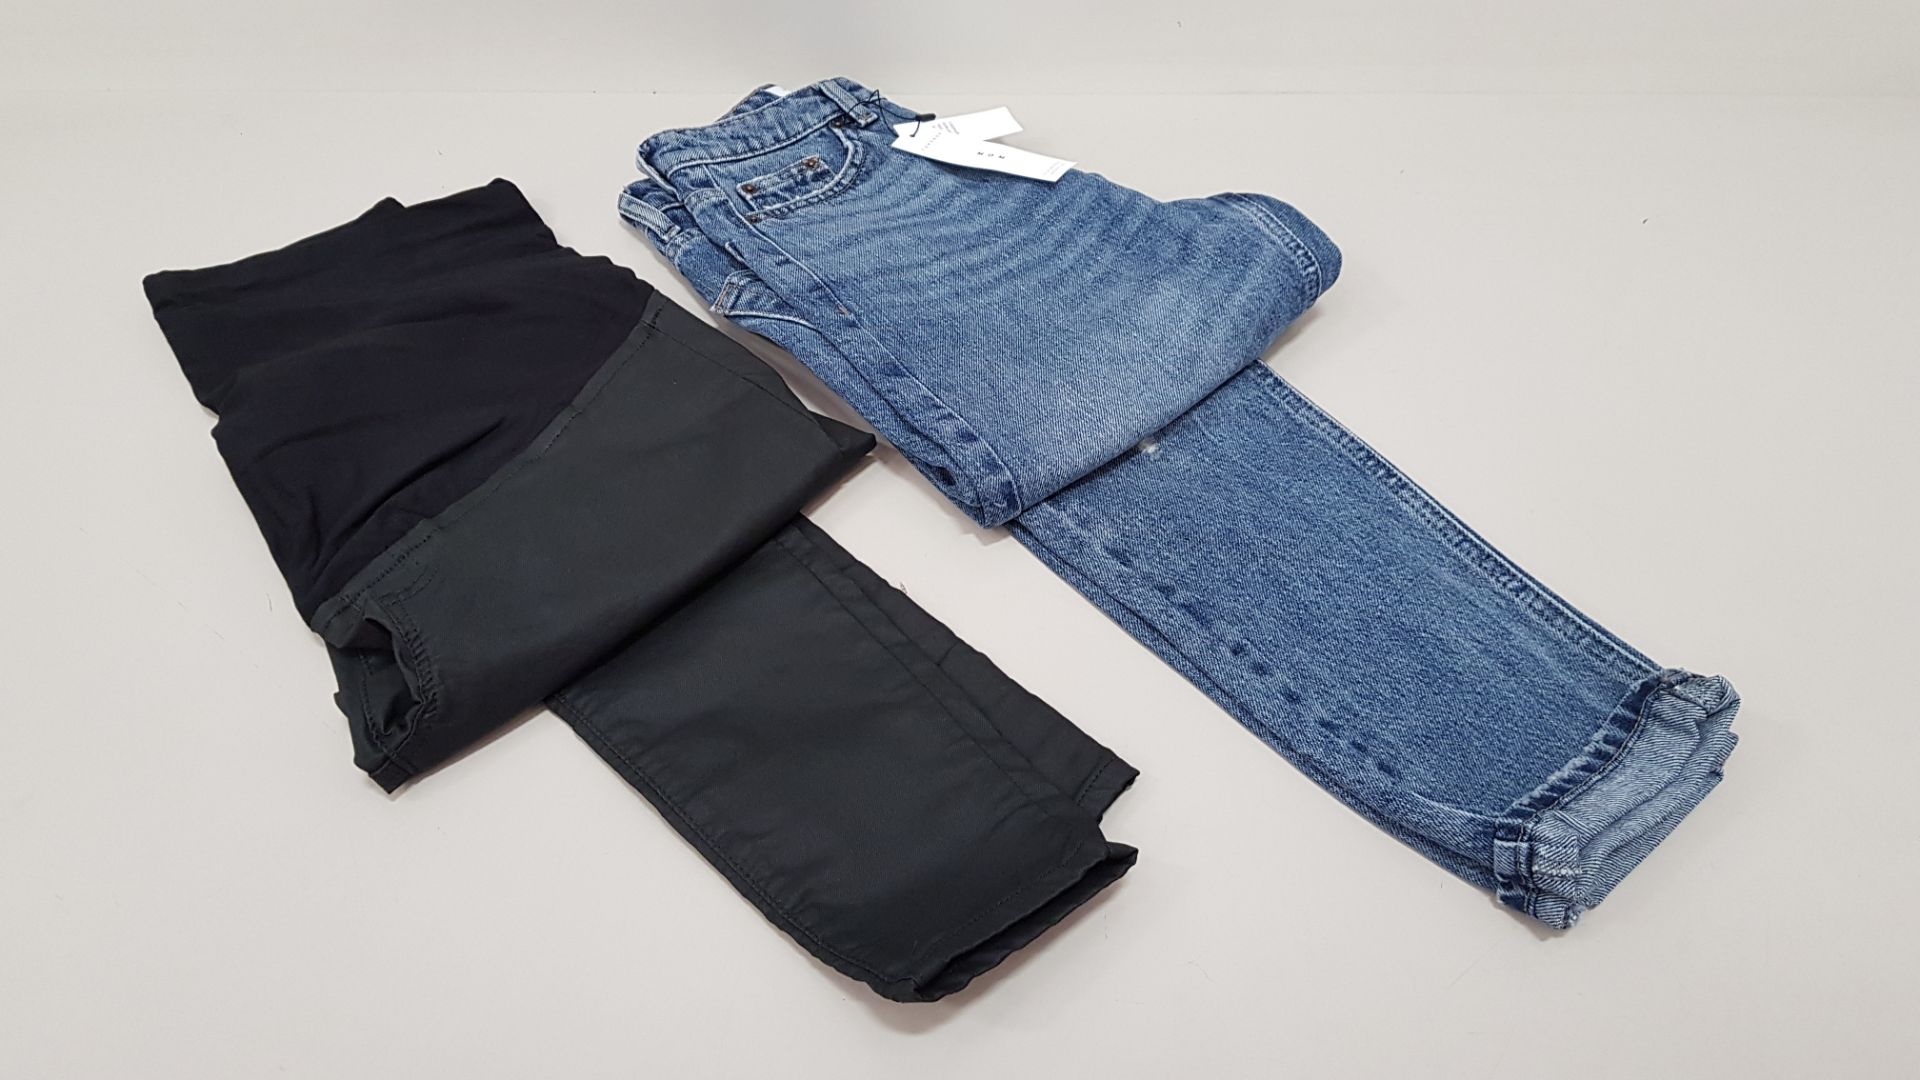 15 X BRAND NEW TOPSHOP JEANS IN VARIOUS STYLES AND SIZES - 10 X JONI JEANS UK SIZE 12 RRP £42.00 AND